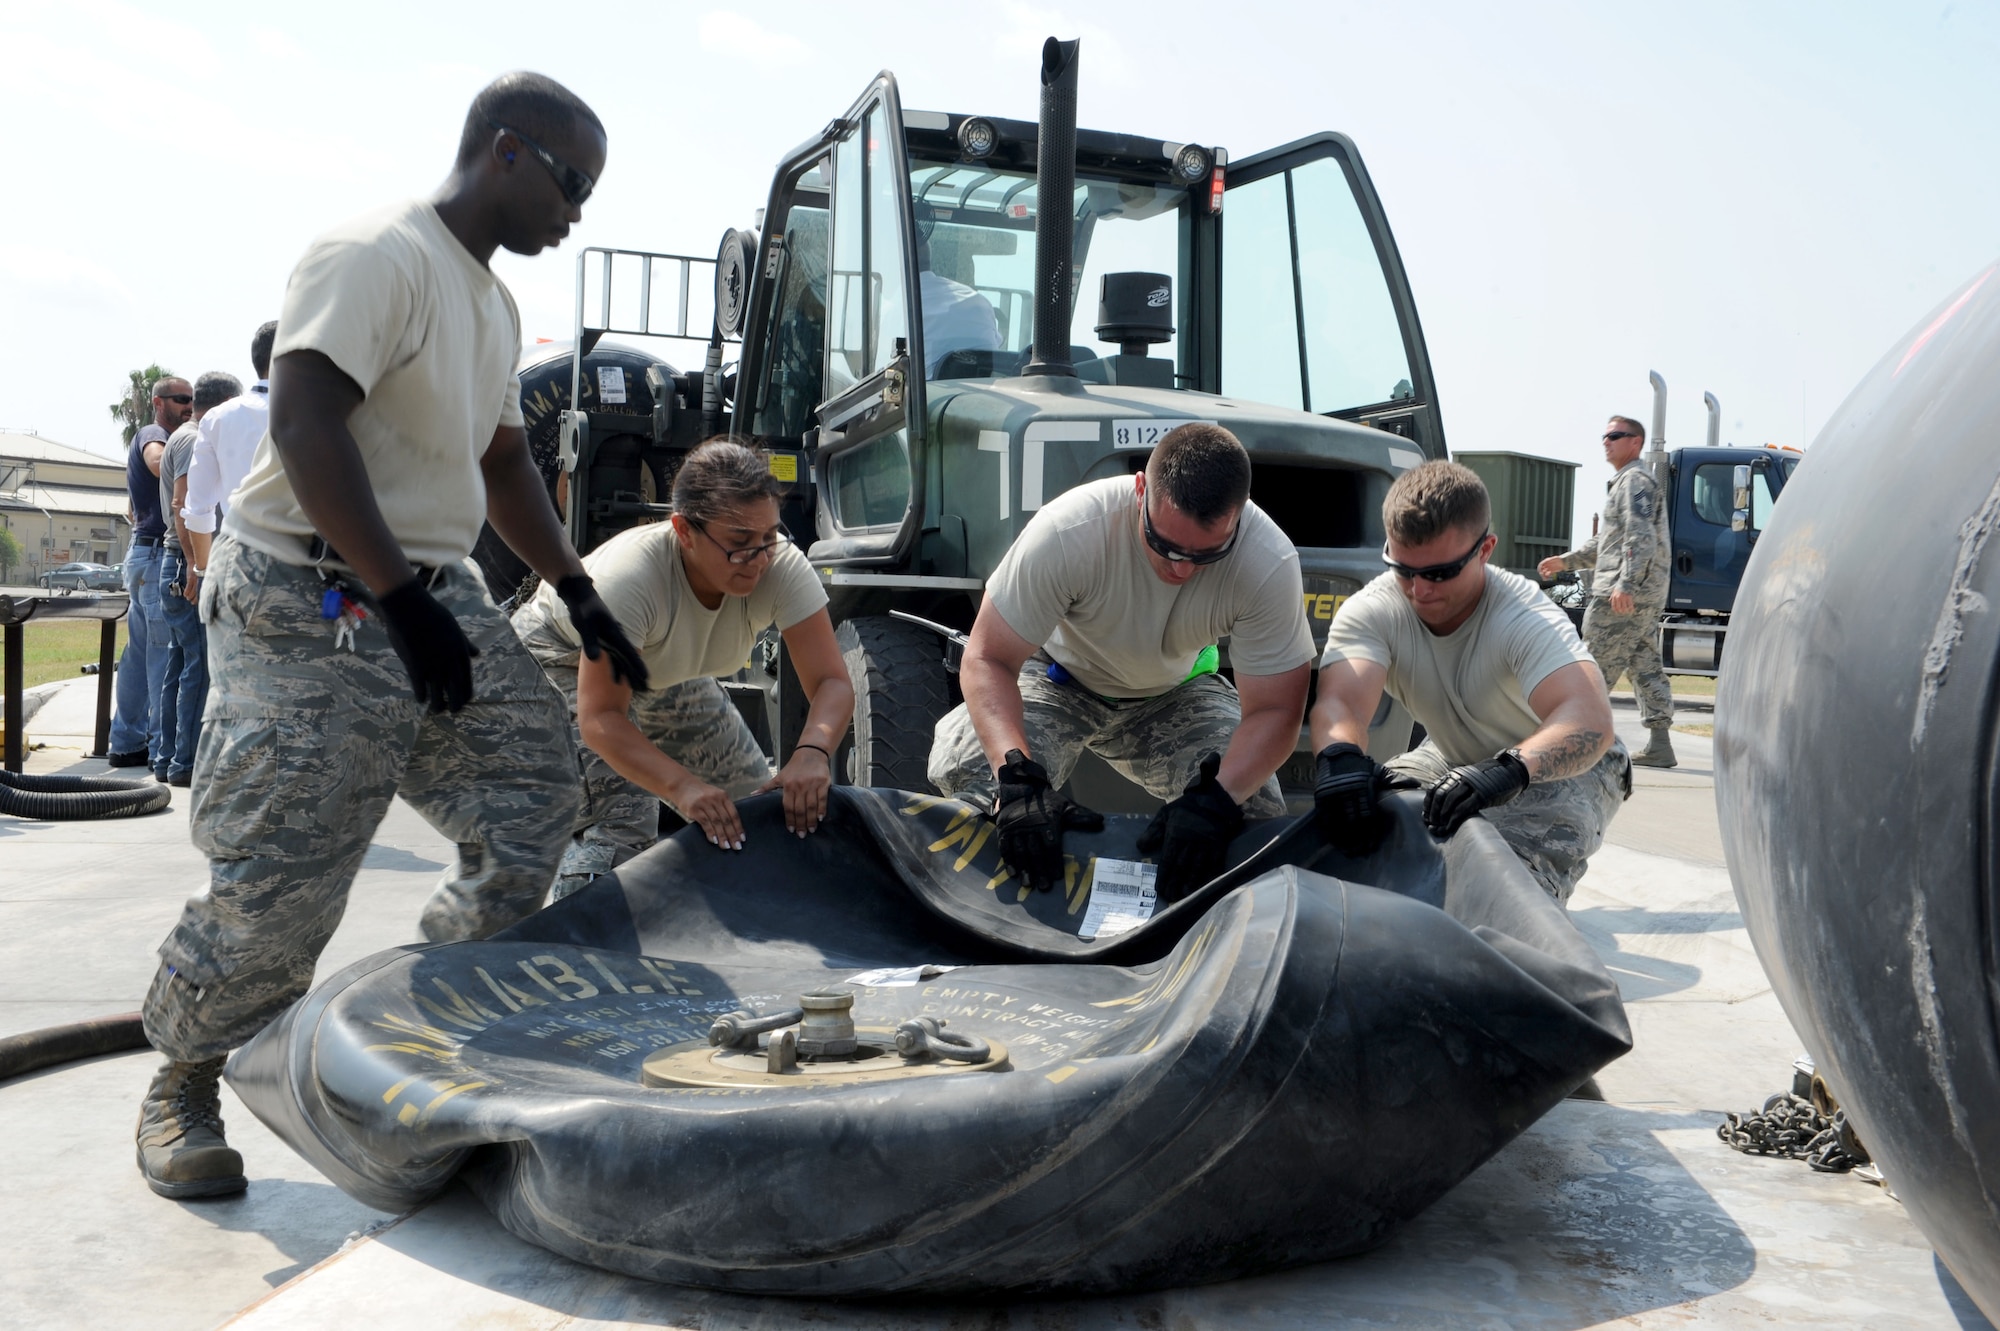 U.S. Air Force Staff Sgt. Brandon Jenkins, (left), Senior Airman Samantha Perez, Tech. Sgt. Tony Otis, and Staff Sgt. Christian Crider, 39th Logistics Readiness Squadron petroleum oils and lubricants flight Airmen, drag a fuel bladder to better allow fuel to flow while unloading into bulk storage July 22, 2016, at Incirlik Air Base, Turkey. Due to an extended loss of commercial power to the base, supplies, including food, water and fuel were delivered to sustain missions here at Incirlik. (U.S. Air Force photo by Staff Sgt. Jack Sanders)